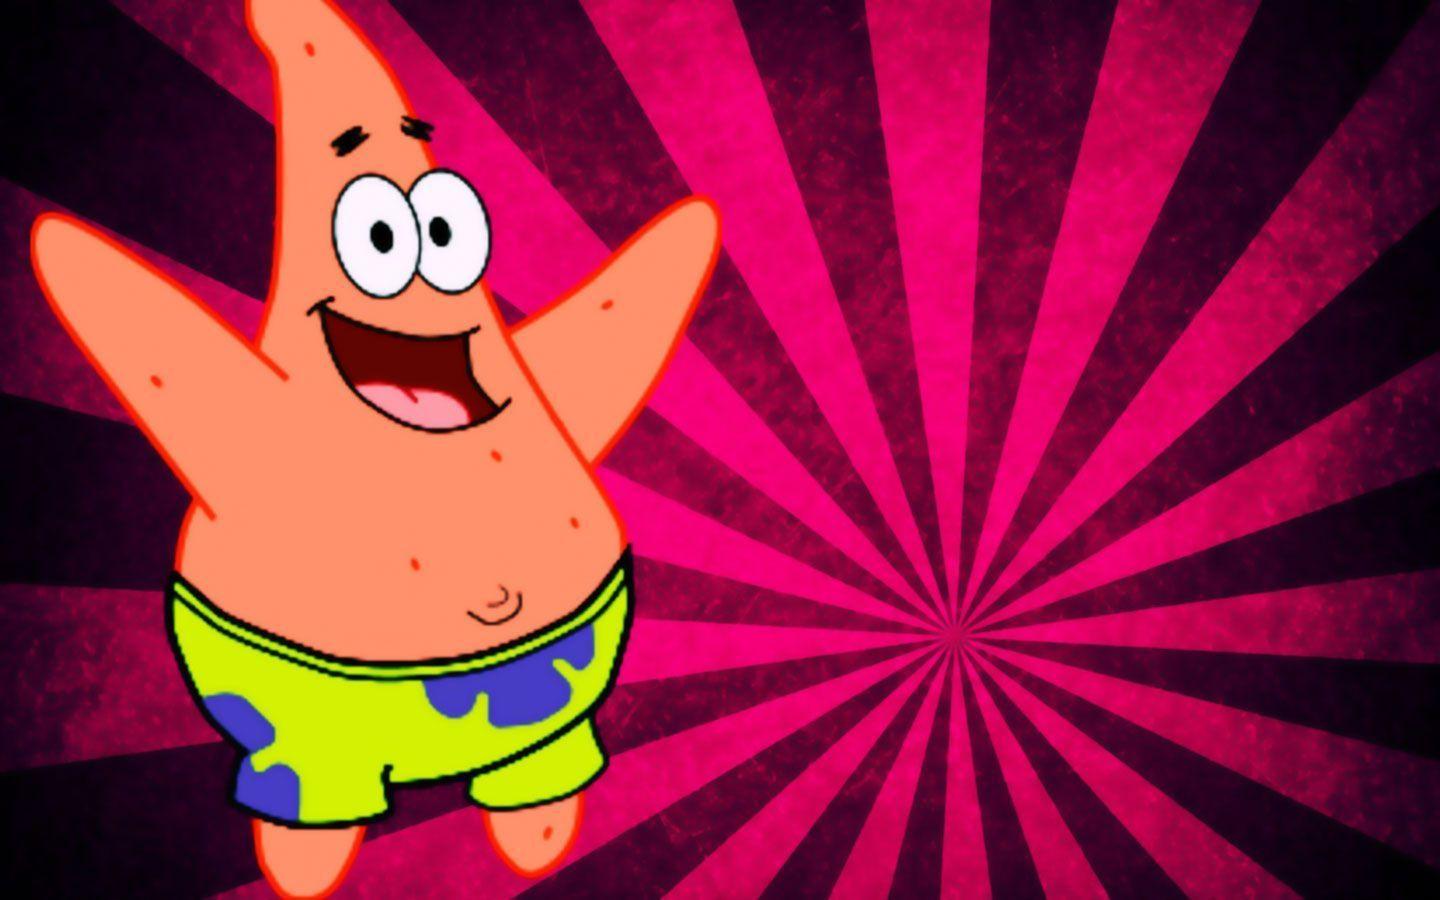 patrick star backgrounds – 1440×900 High Definition Wallpapers